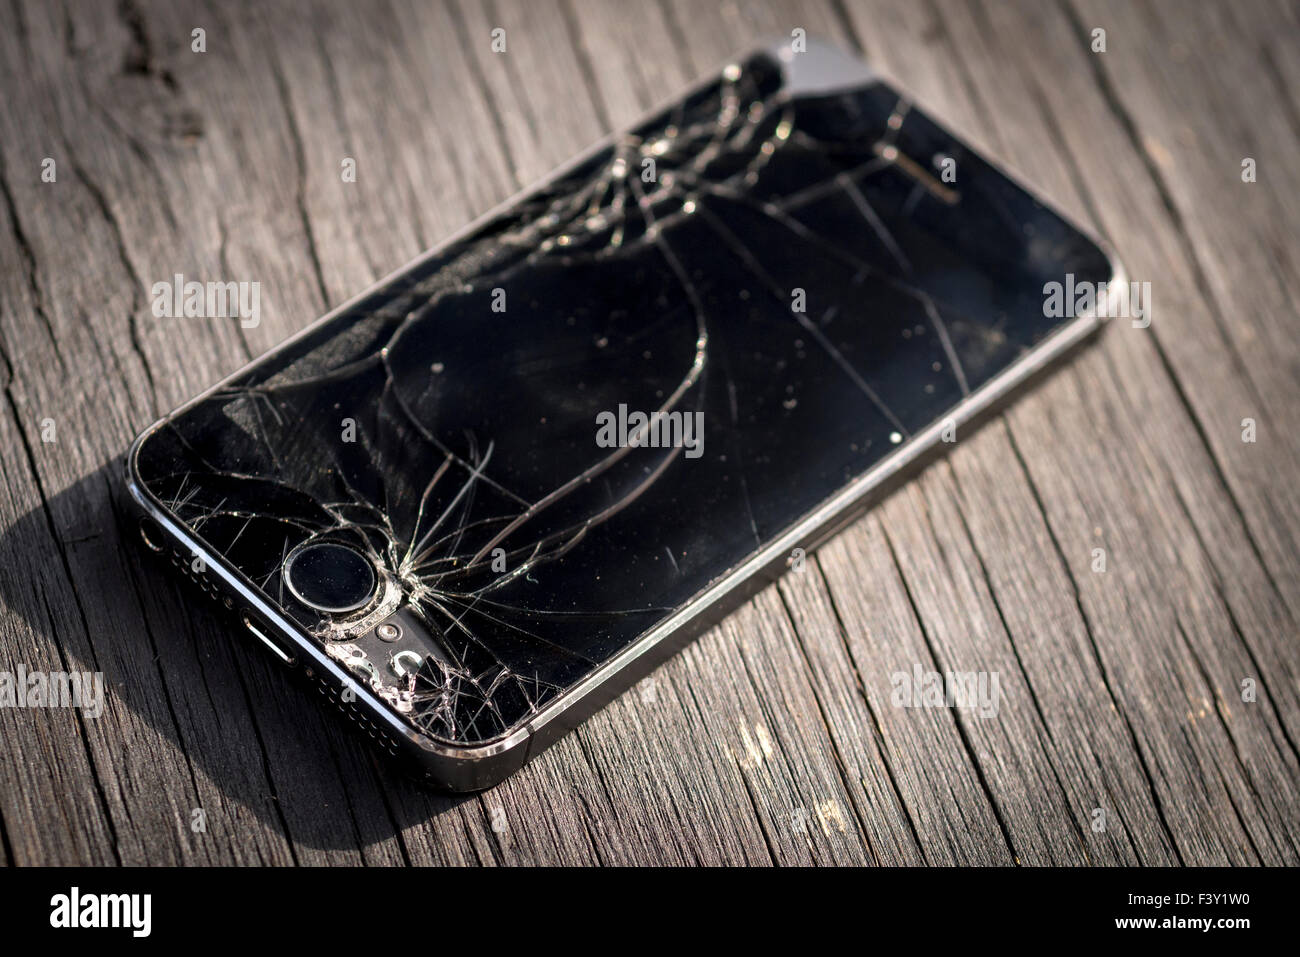 Apple Iphone 5s with a Broken Screen Stock Photo - Alamy